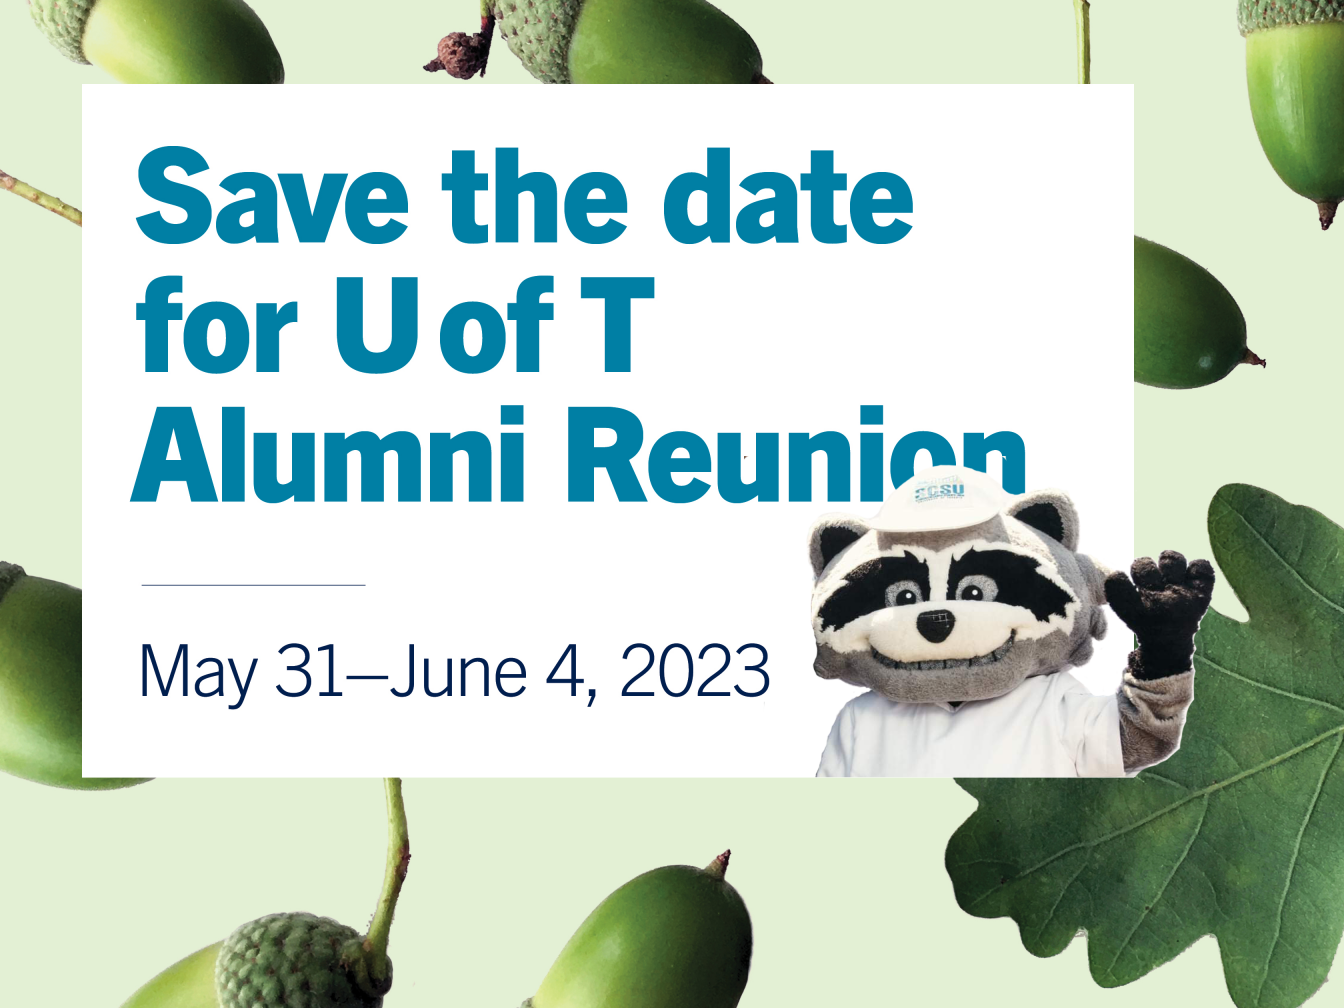 Save the date for the U of T Alumni Reunion May 31 to June 4